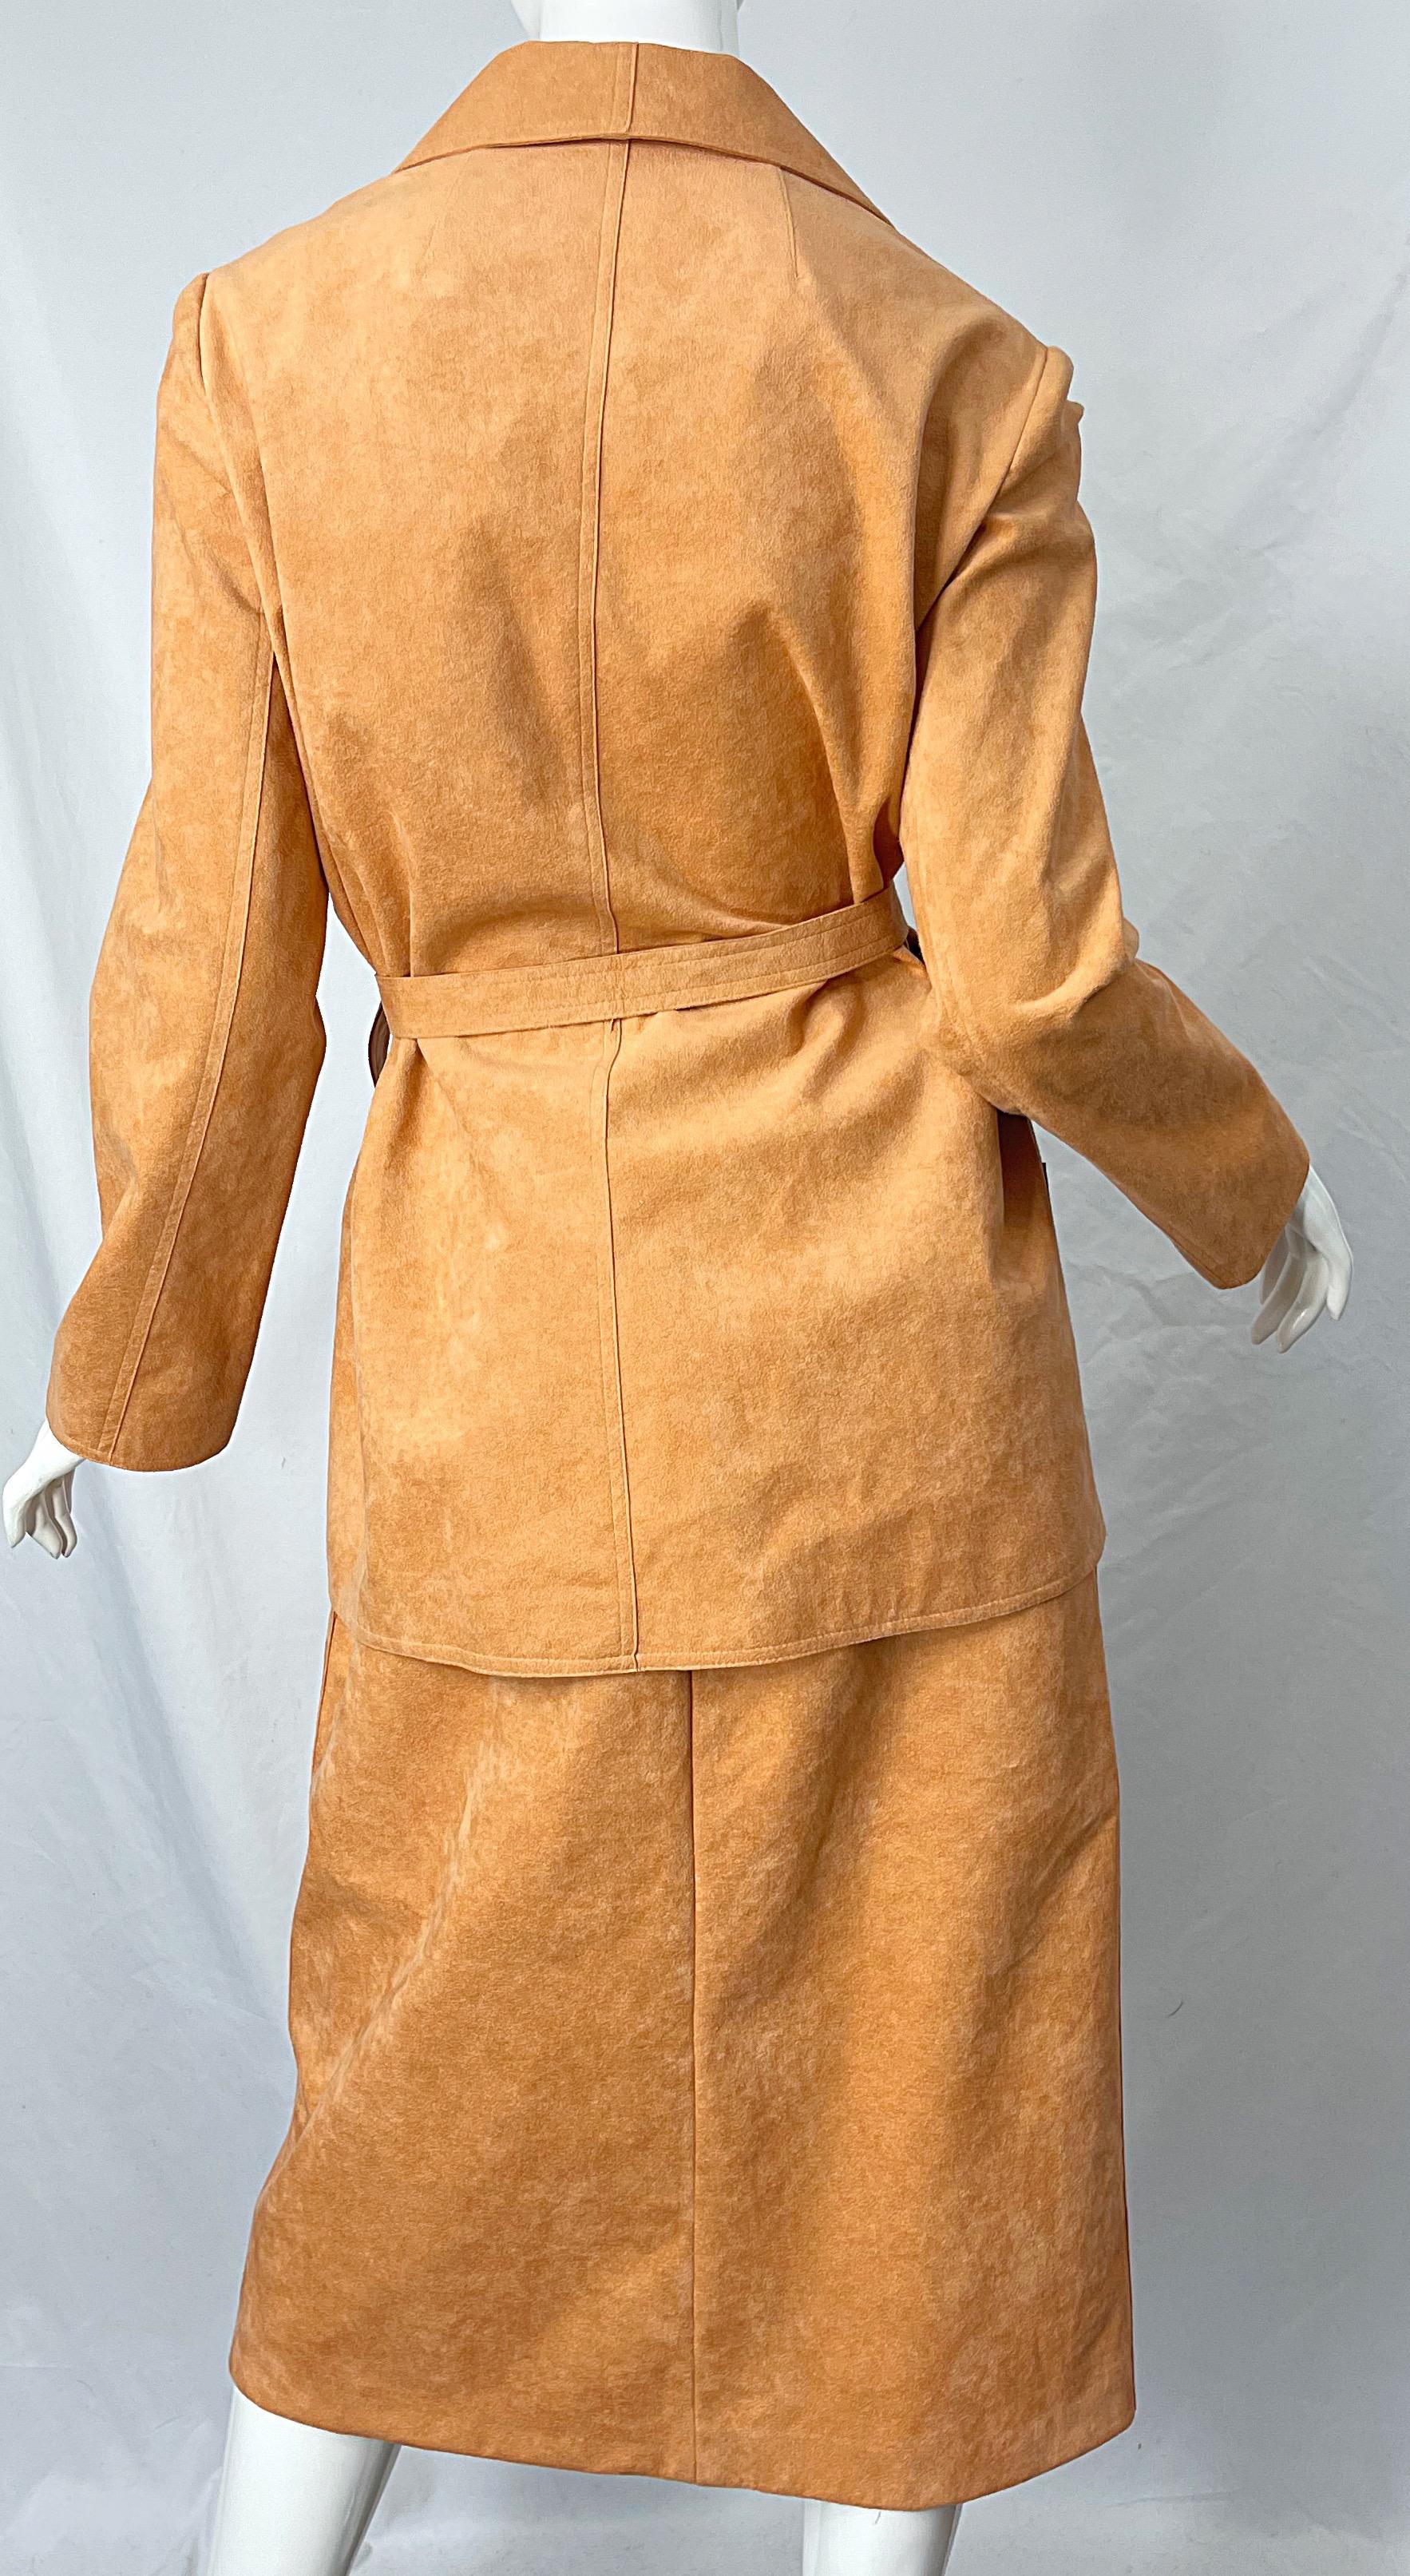 Halston 1970s Salmon Peach Ultrasuede Vintage 70s Belted Jacket and Skirt Suit For Sale 3